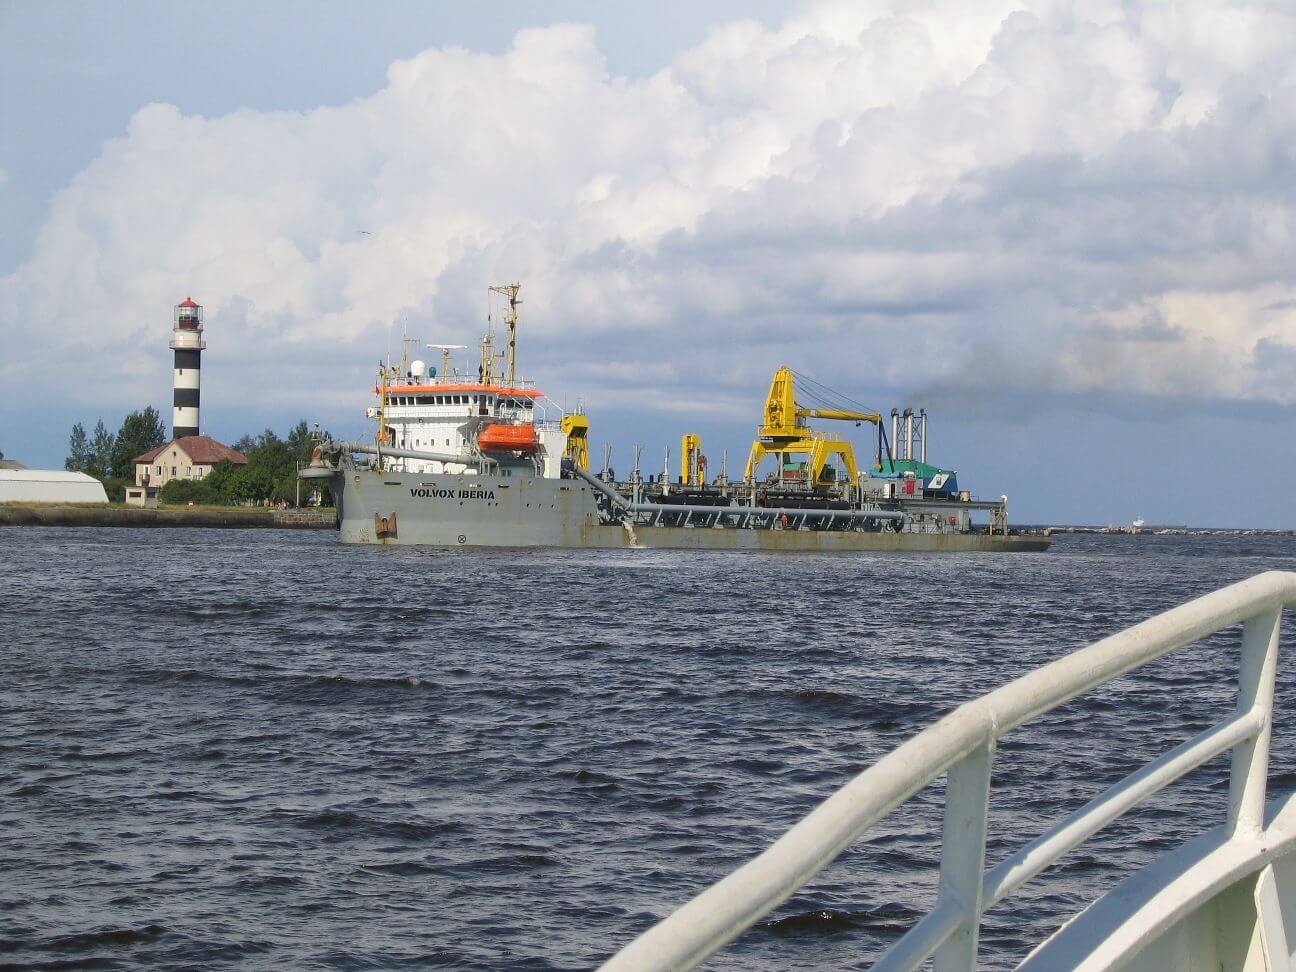 Deepening of the approach route to Berth KS-28 at Kundzinsala Oil Terminal, and dredging works in the water basin adjoining Berths SD-3, SD-4 and SD-5, TSHD Volvox Iberia, 2003